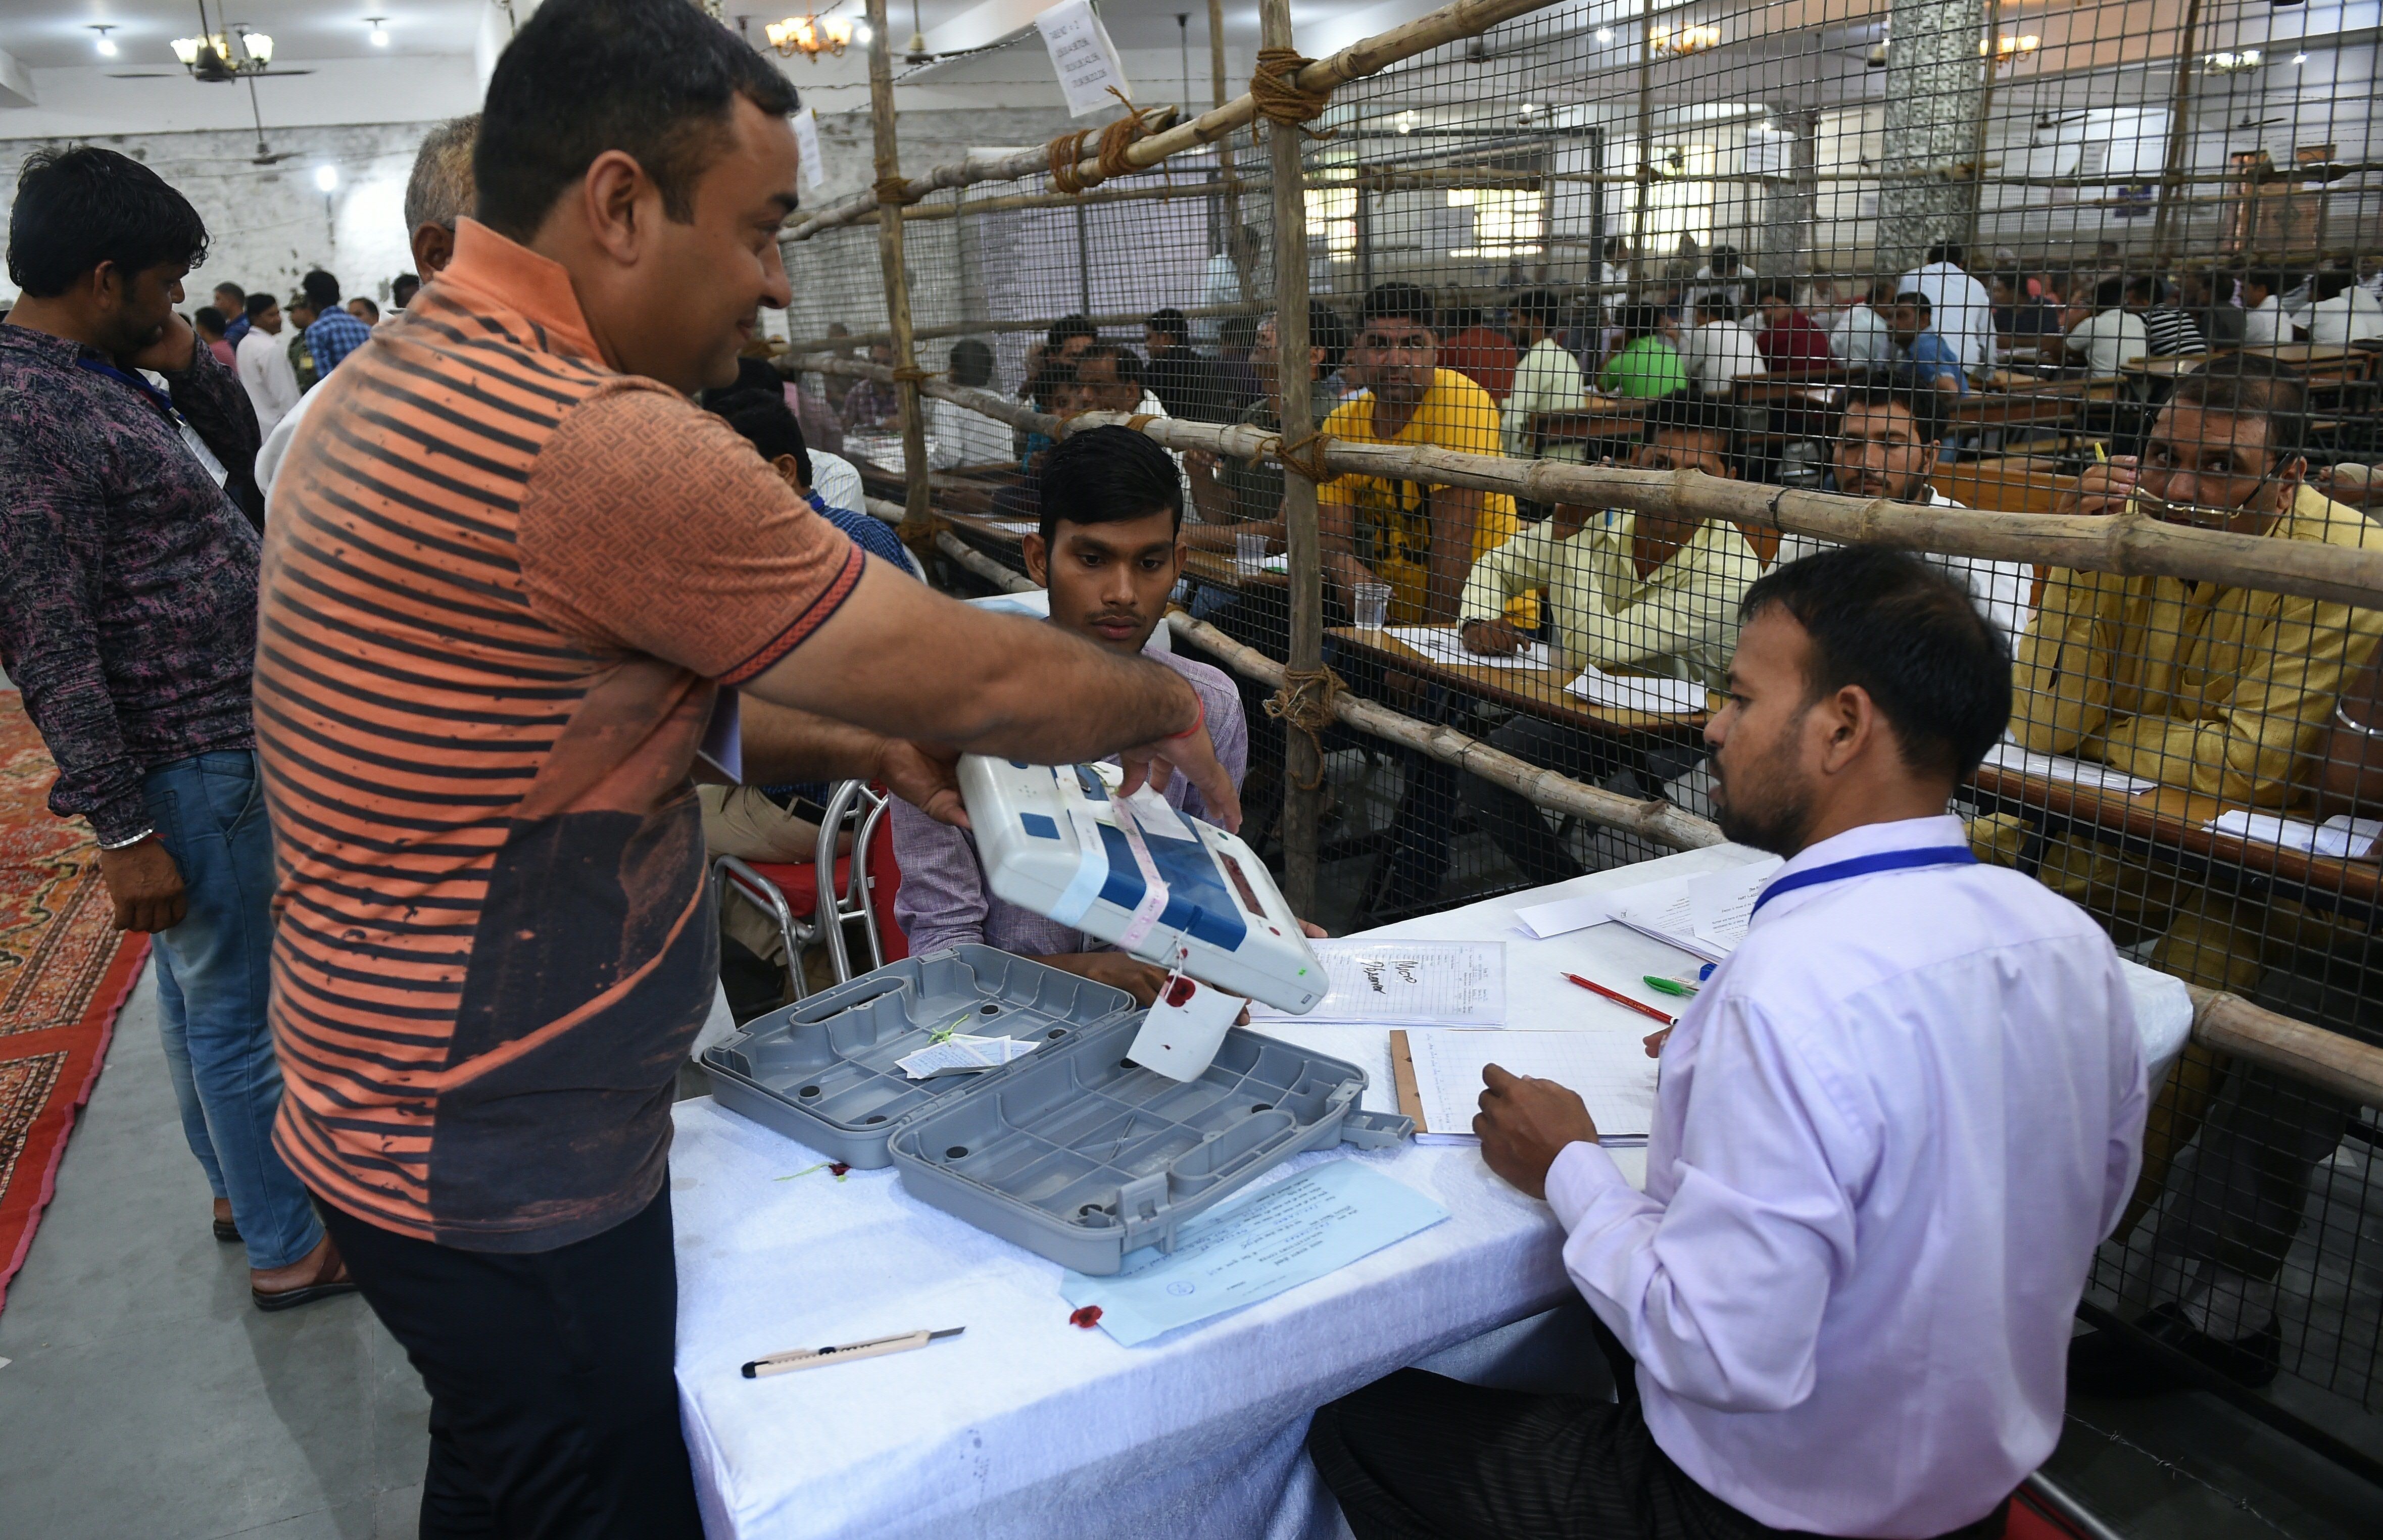 Indian election officials show an open Electronic Voting Machine (EVM) to counting agents at a counting centre in Faridabad in the northern Indian state of haryana on May 23, 2019.